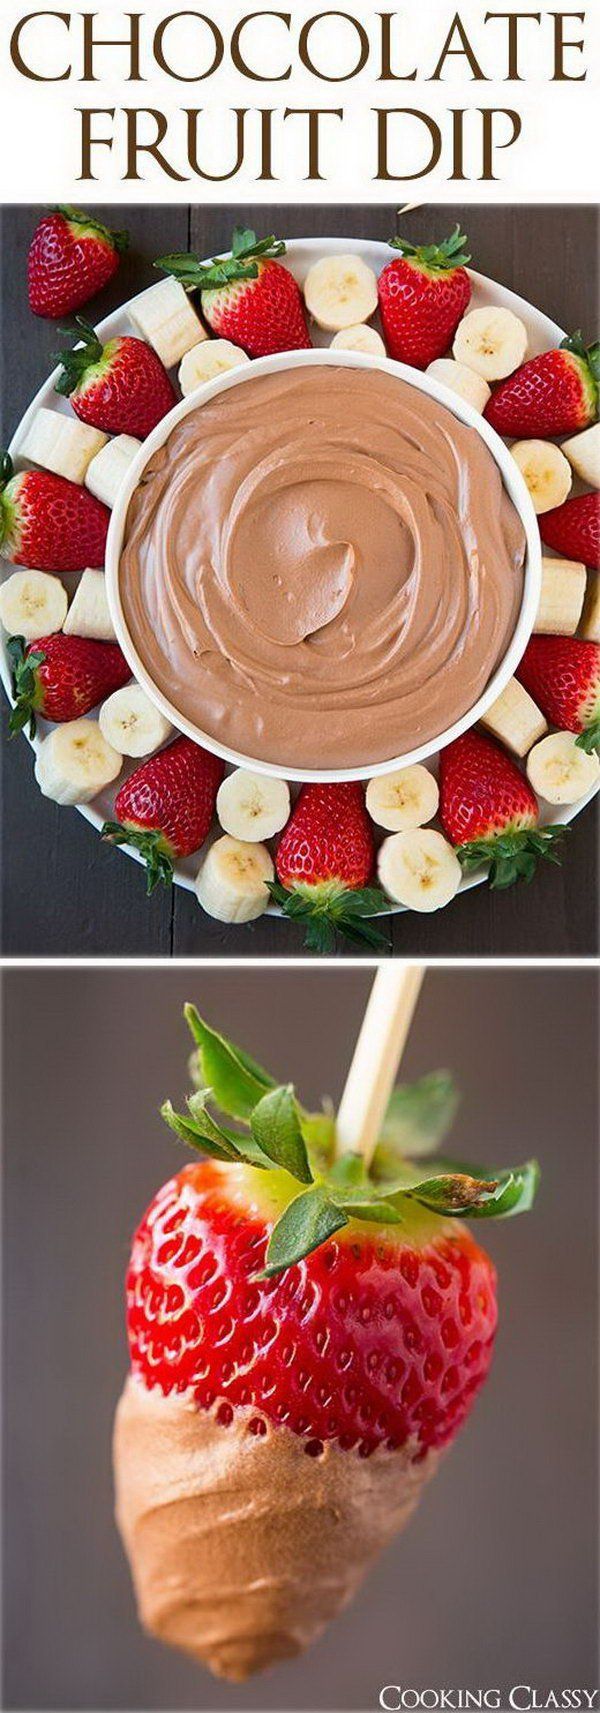 Chocolate Fruit Dip. Use electric hand mixer to whip cream, powder sugar, cocoa powder and cream cheese fo